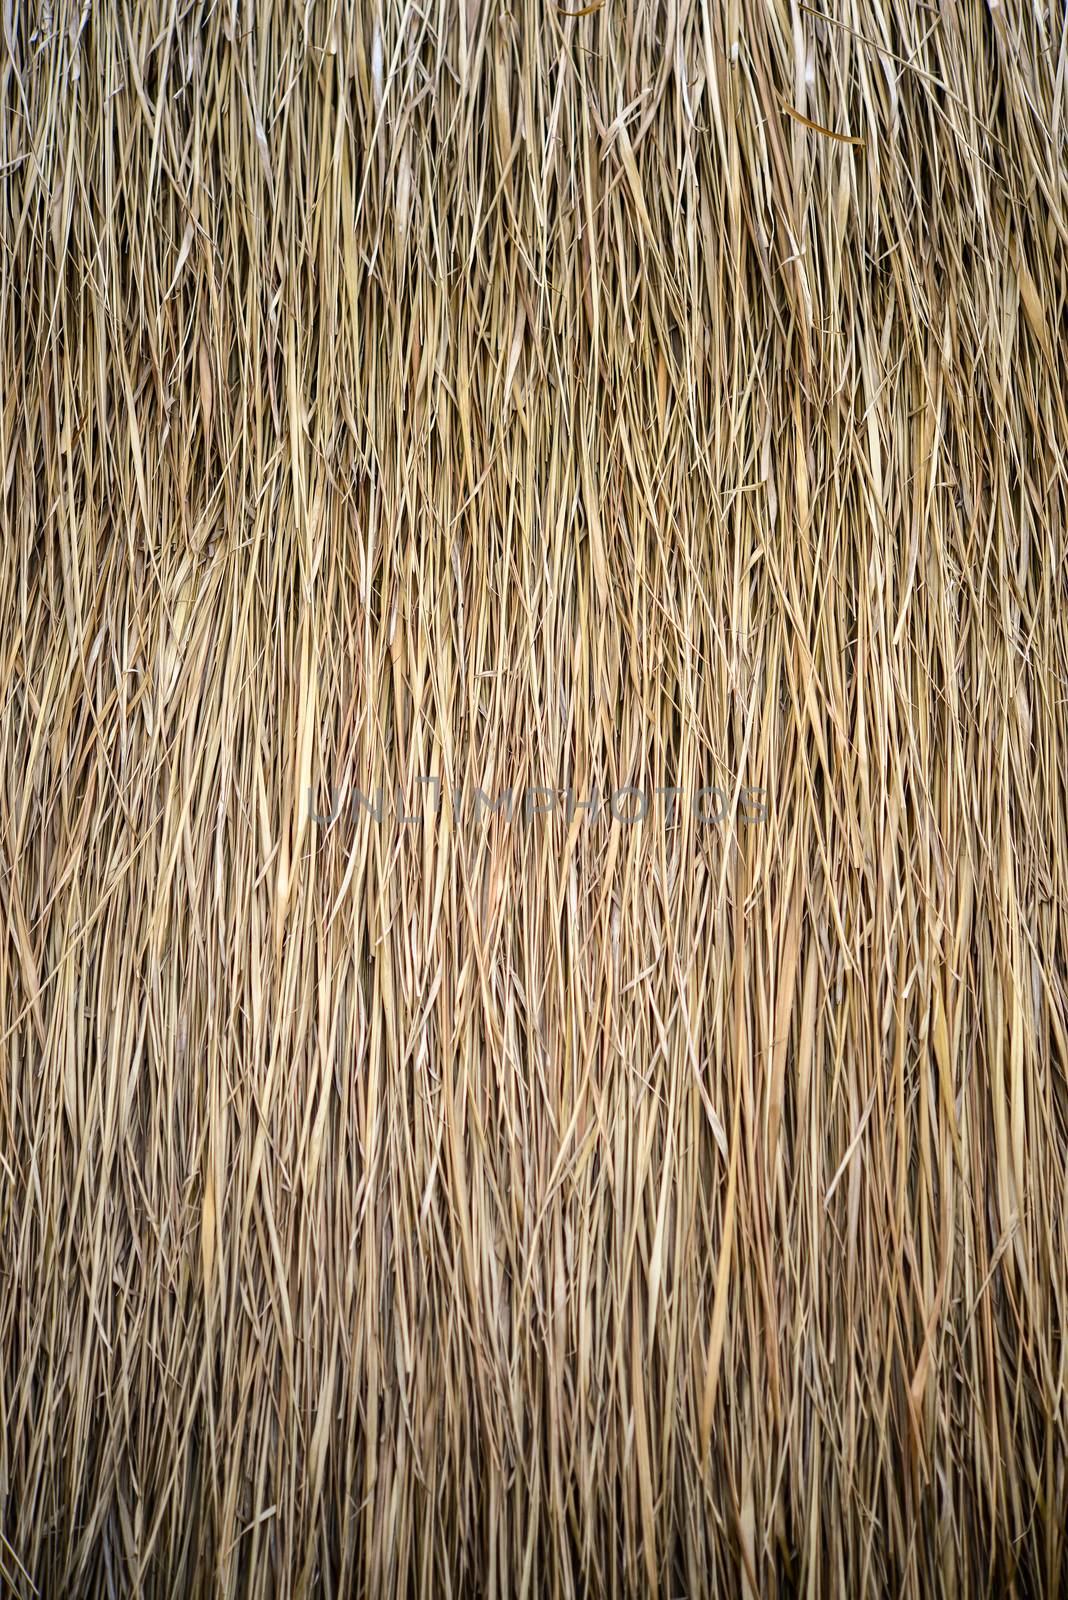 thatch roof background